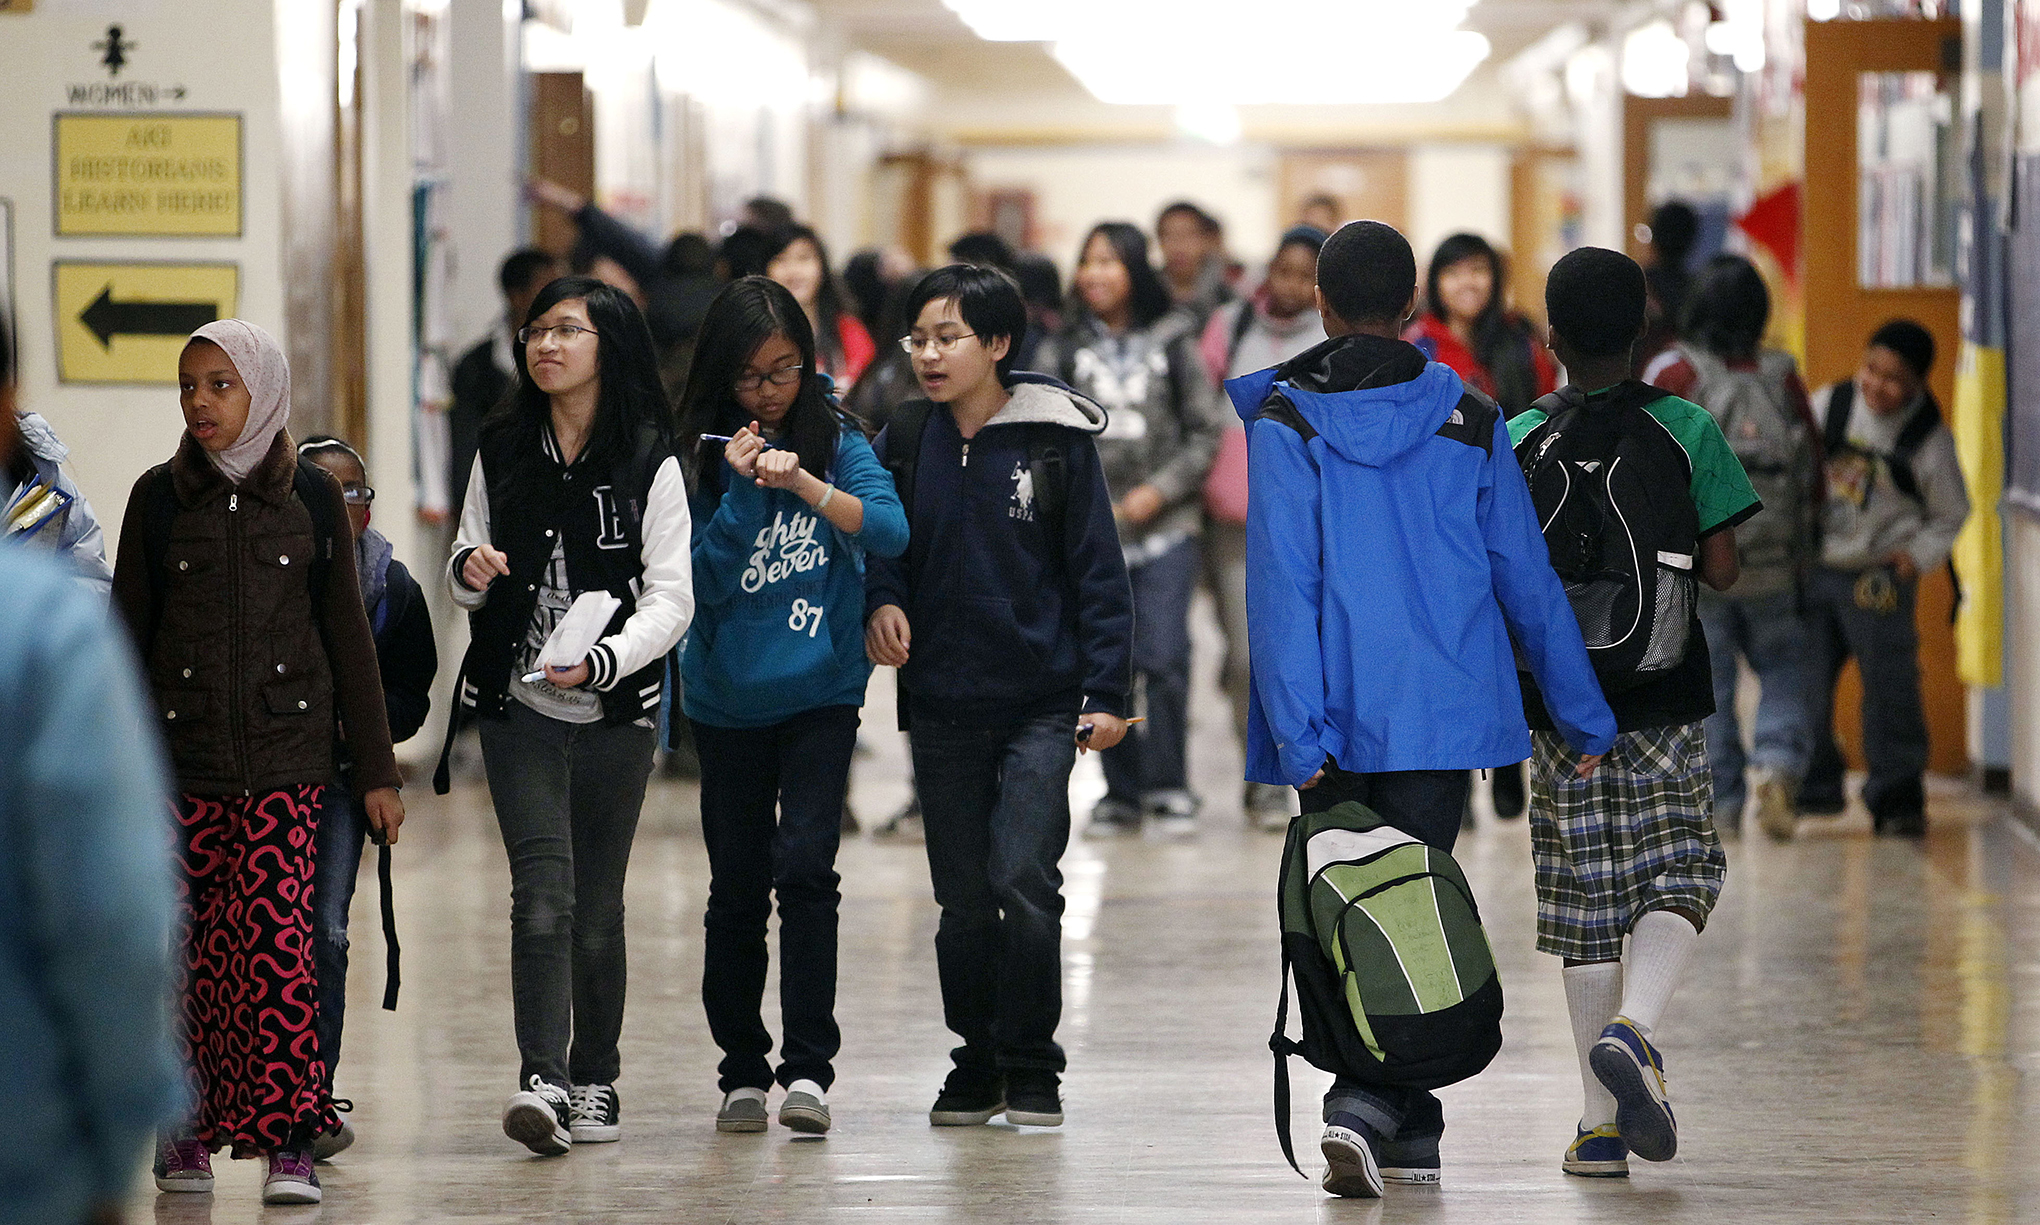 Students walk in the hallway of their middle school between classes.